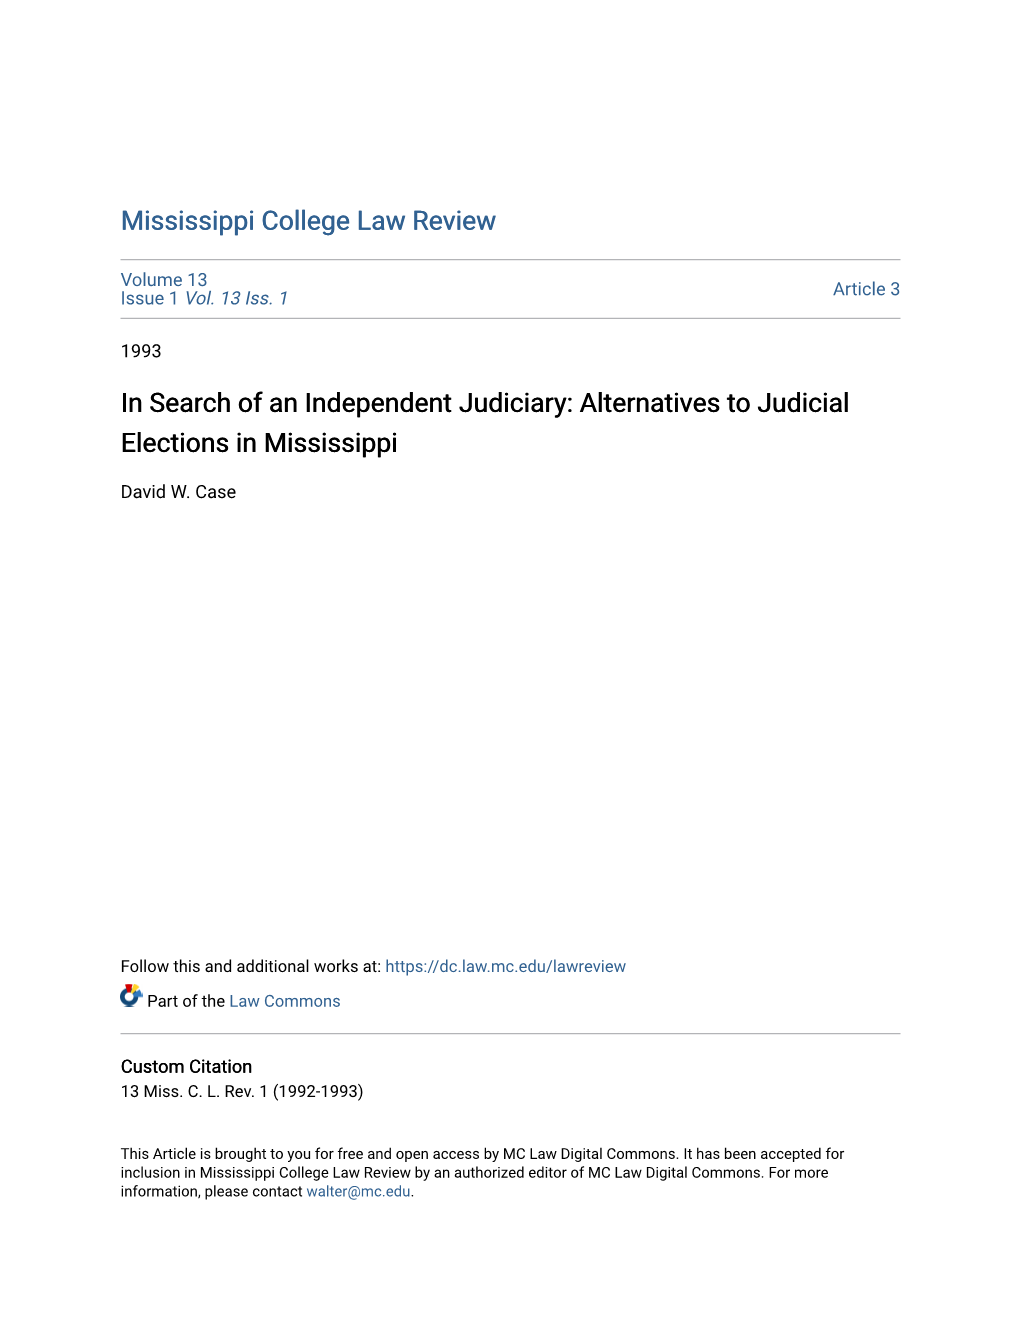 In Search of an Independent Judiciary: Alternatives to Judicial Elections in Mississippi